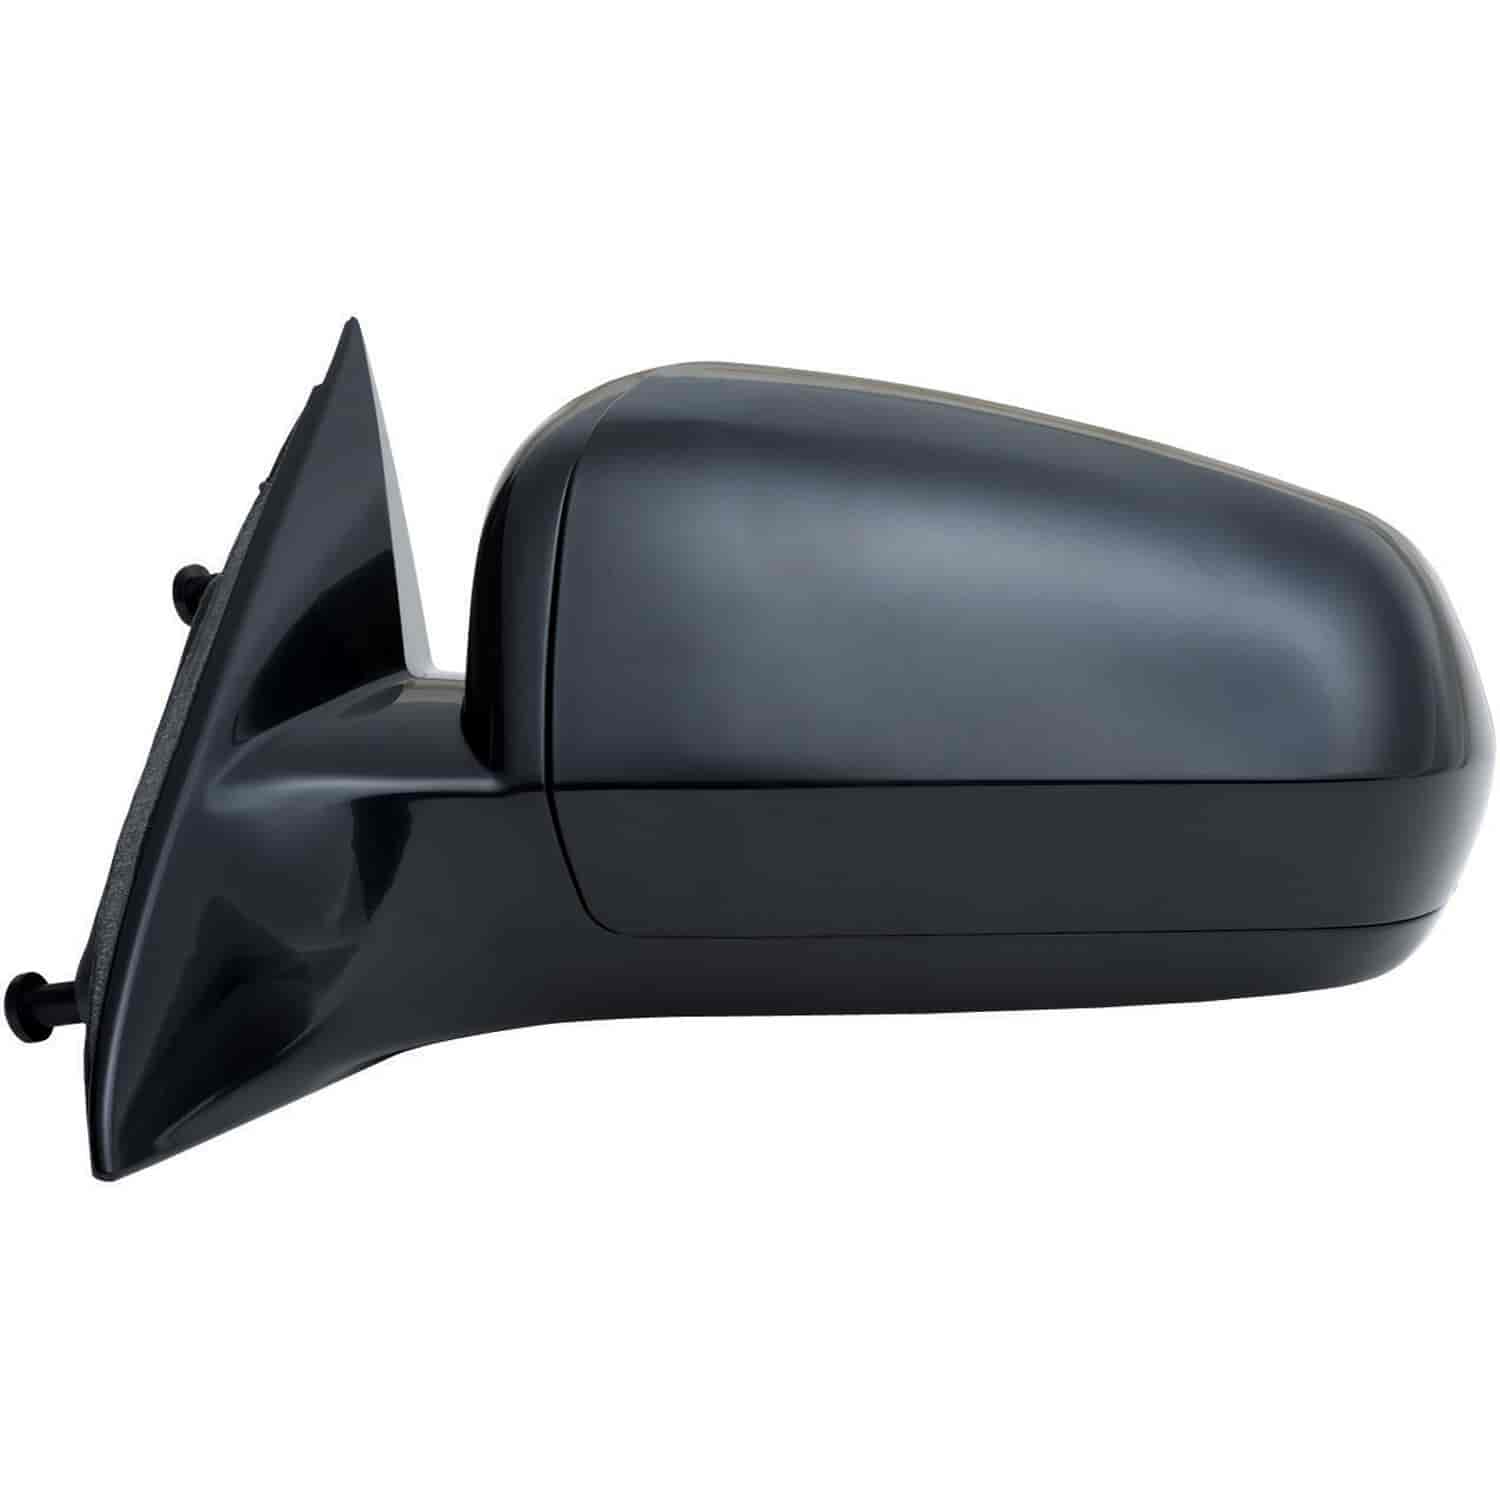 OEM Style Replacement mirror for 07-10 Chrysler Sebring Sedan driver side mirror tested to fit and f